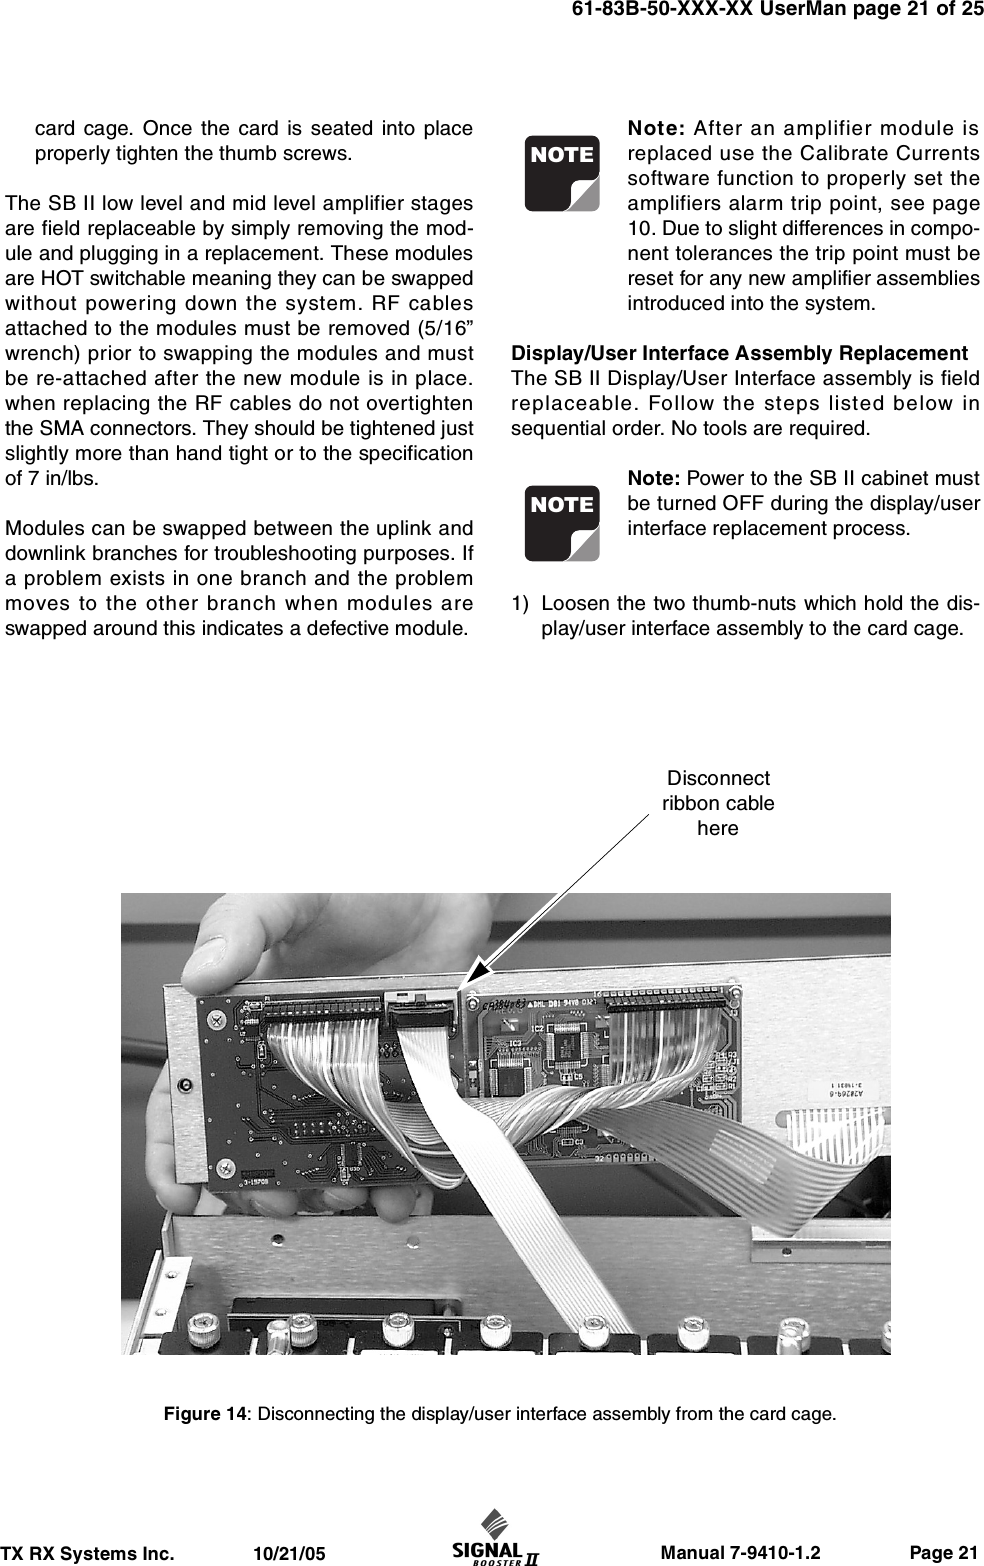                     Manual 7-9410-1.2                 Page 21TX RX Systems Inc.               10/21/0561-83B-50-XXX-XX UserMan page 21 of 25card cage. Once the card is seated into placeproperly tighten the thumb screws.The SB II low level and mid level amplifier stagesare field replaceable by simply removing the mod-ule and plugging in a replacement. These modulesare HOT switchable meaning they can be swappedwithout powering down the system. RF cablesattached to the modules must be removed (5/16”wrench) prior to swapping the modules and mustbe re-attached after the new module is in place.when replacing the RF cables do not overtightenthe SMA connectors. They should be tightened justslightly more than hand tight or to the specificationof 7 in/lbs.Modules can be swapped between the uplink anddownlink branches for troubleshooting purposes. Ifa problem exists in one branch and the problemmoves to the other branch when modules areswapped around this indicates a defective module.Note: After an amplifier module isreplaced use the Calibrate Currentssoftware function to properly set theamplifiers alarm trip point, see page10. Due to slight differences in compo-nent tolerances the trip point must bereset for any new amplifier assembliesintroduced into the system.Display/User Interface Assembly ReplacementThe SB II Display/User Interface assembly is fieldreplaceable. Follow the steps listed below insequential order. No tools are required.Note: Power to the SB II cabinet mustbe turned OFF during the display/userinterface replacement process.1) Loosen the two thumb-nuts which hold the dis-play/user interface assembly to the card cage.NOTENOTEFigure 14: Disconnecting the display/user interface assembly from the card cage.Disconnectribbon cablehere